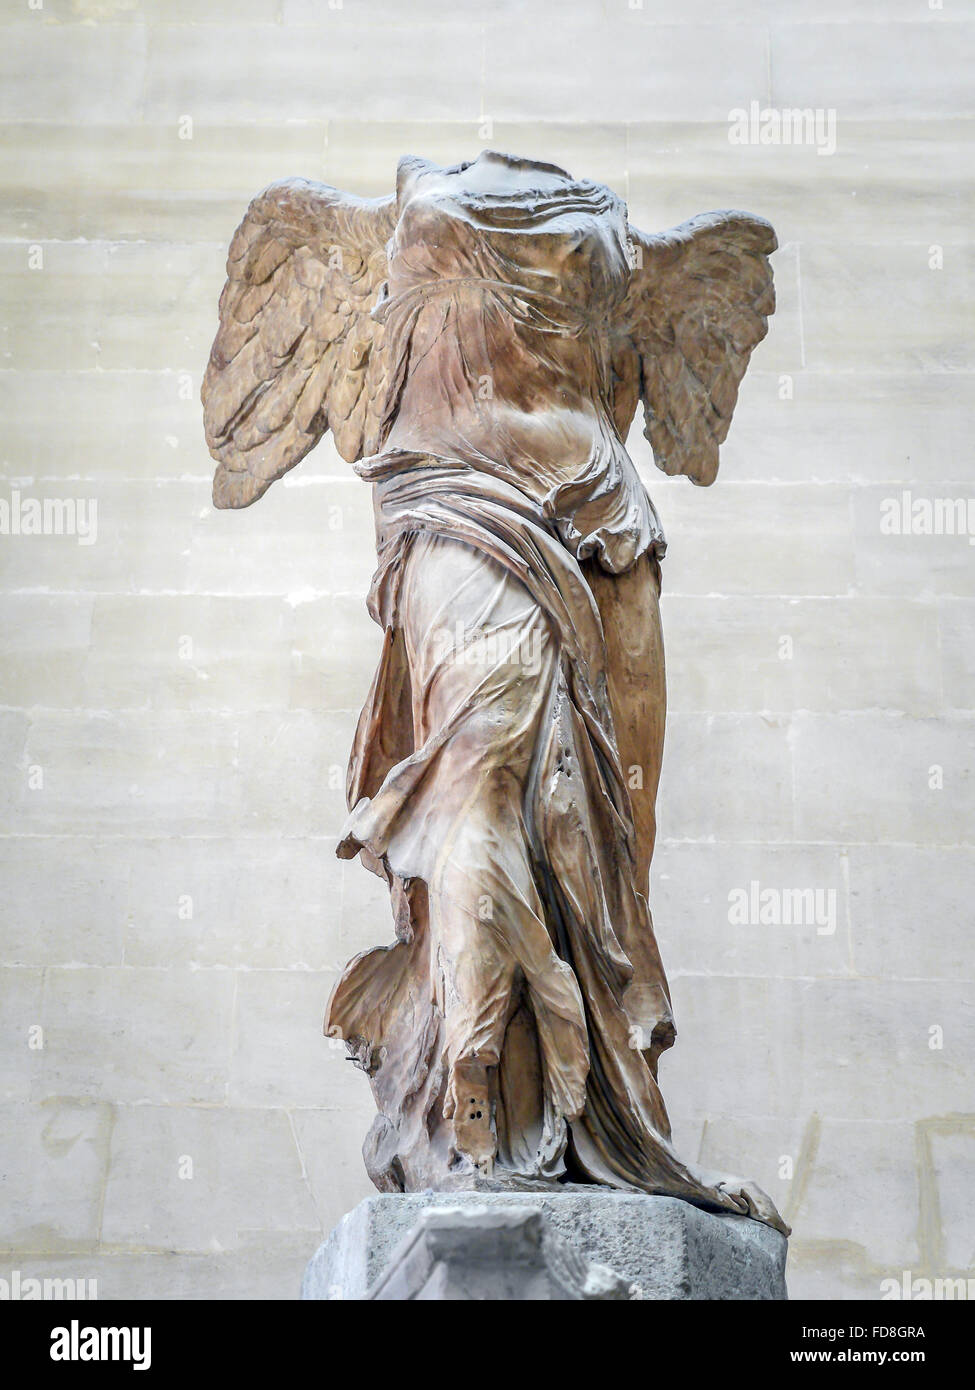 PARIS, FRANCE - AUGUST 28 2013: Winged Victory of Samothrace, also called Nike of Samothrace, exhibited in Louvre Museum Stock Photo